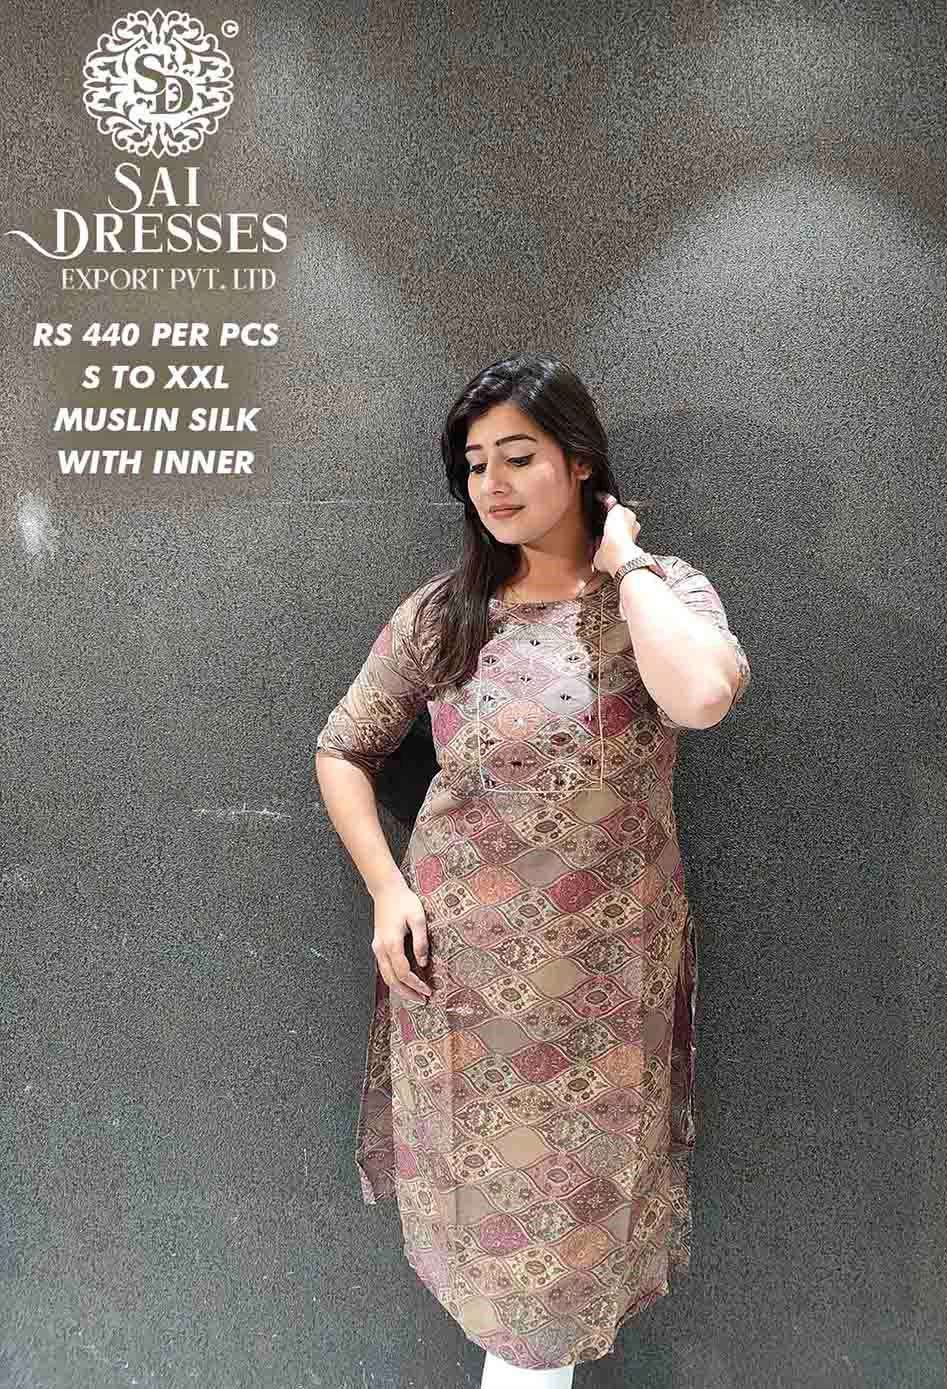 SAI DRESSES PRESENT D.NO SD44 READY TO WEAR DIGITAL PRINTED KURTI COMBO COLLECTION IN WHOLESALE RATE IN SURAT